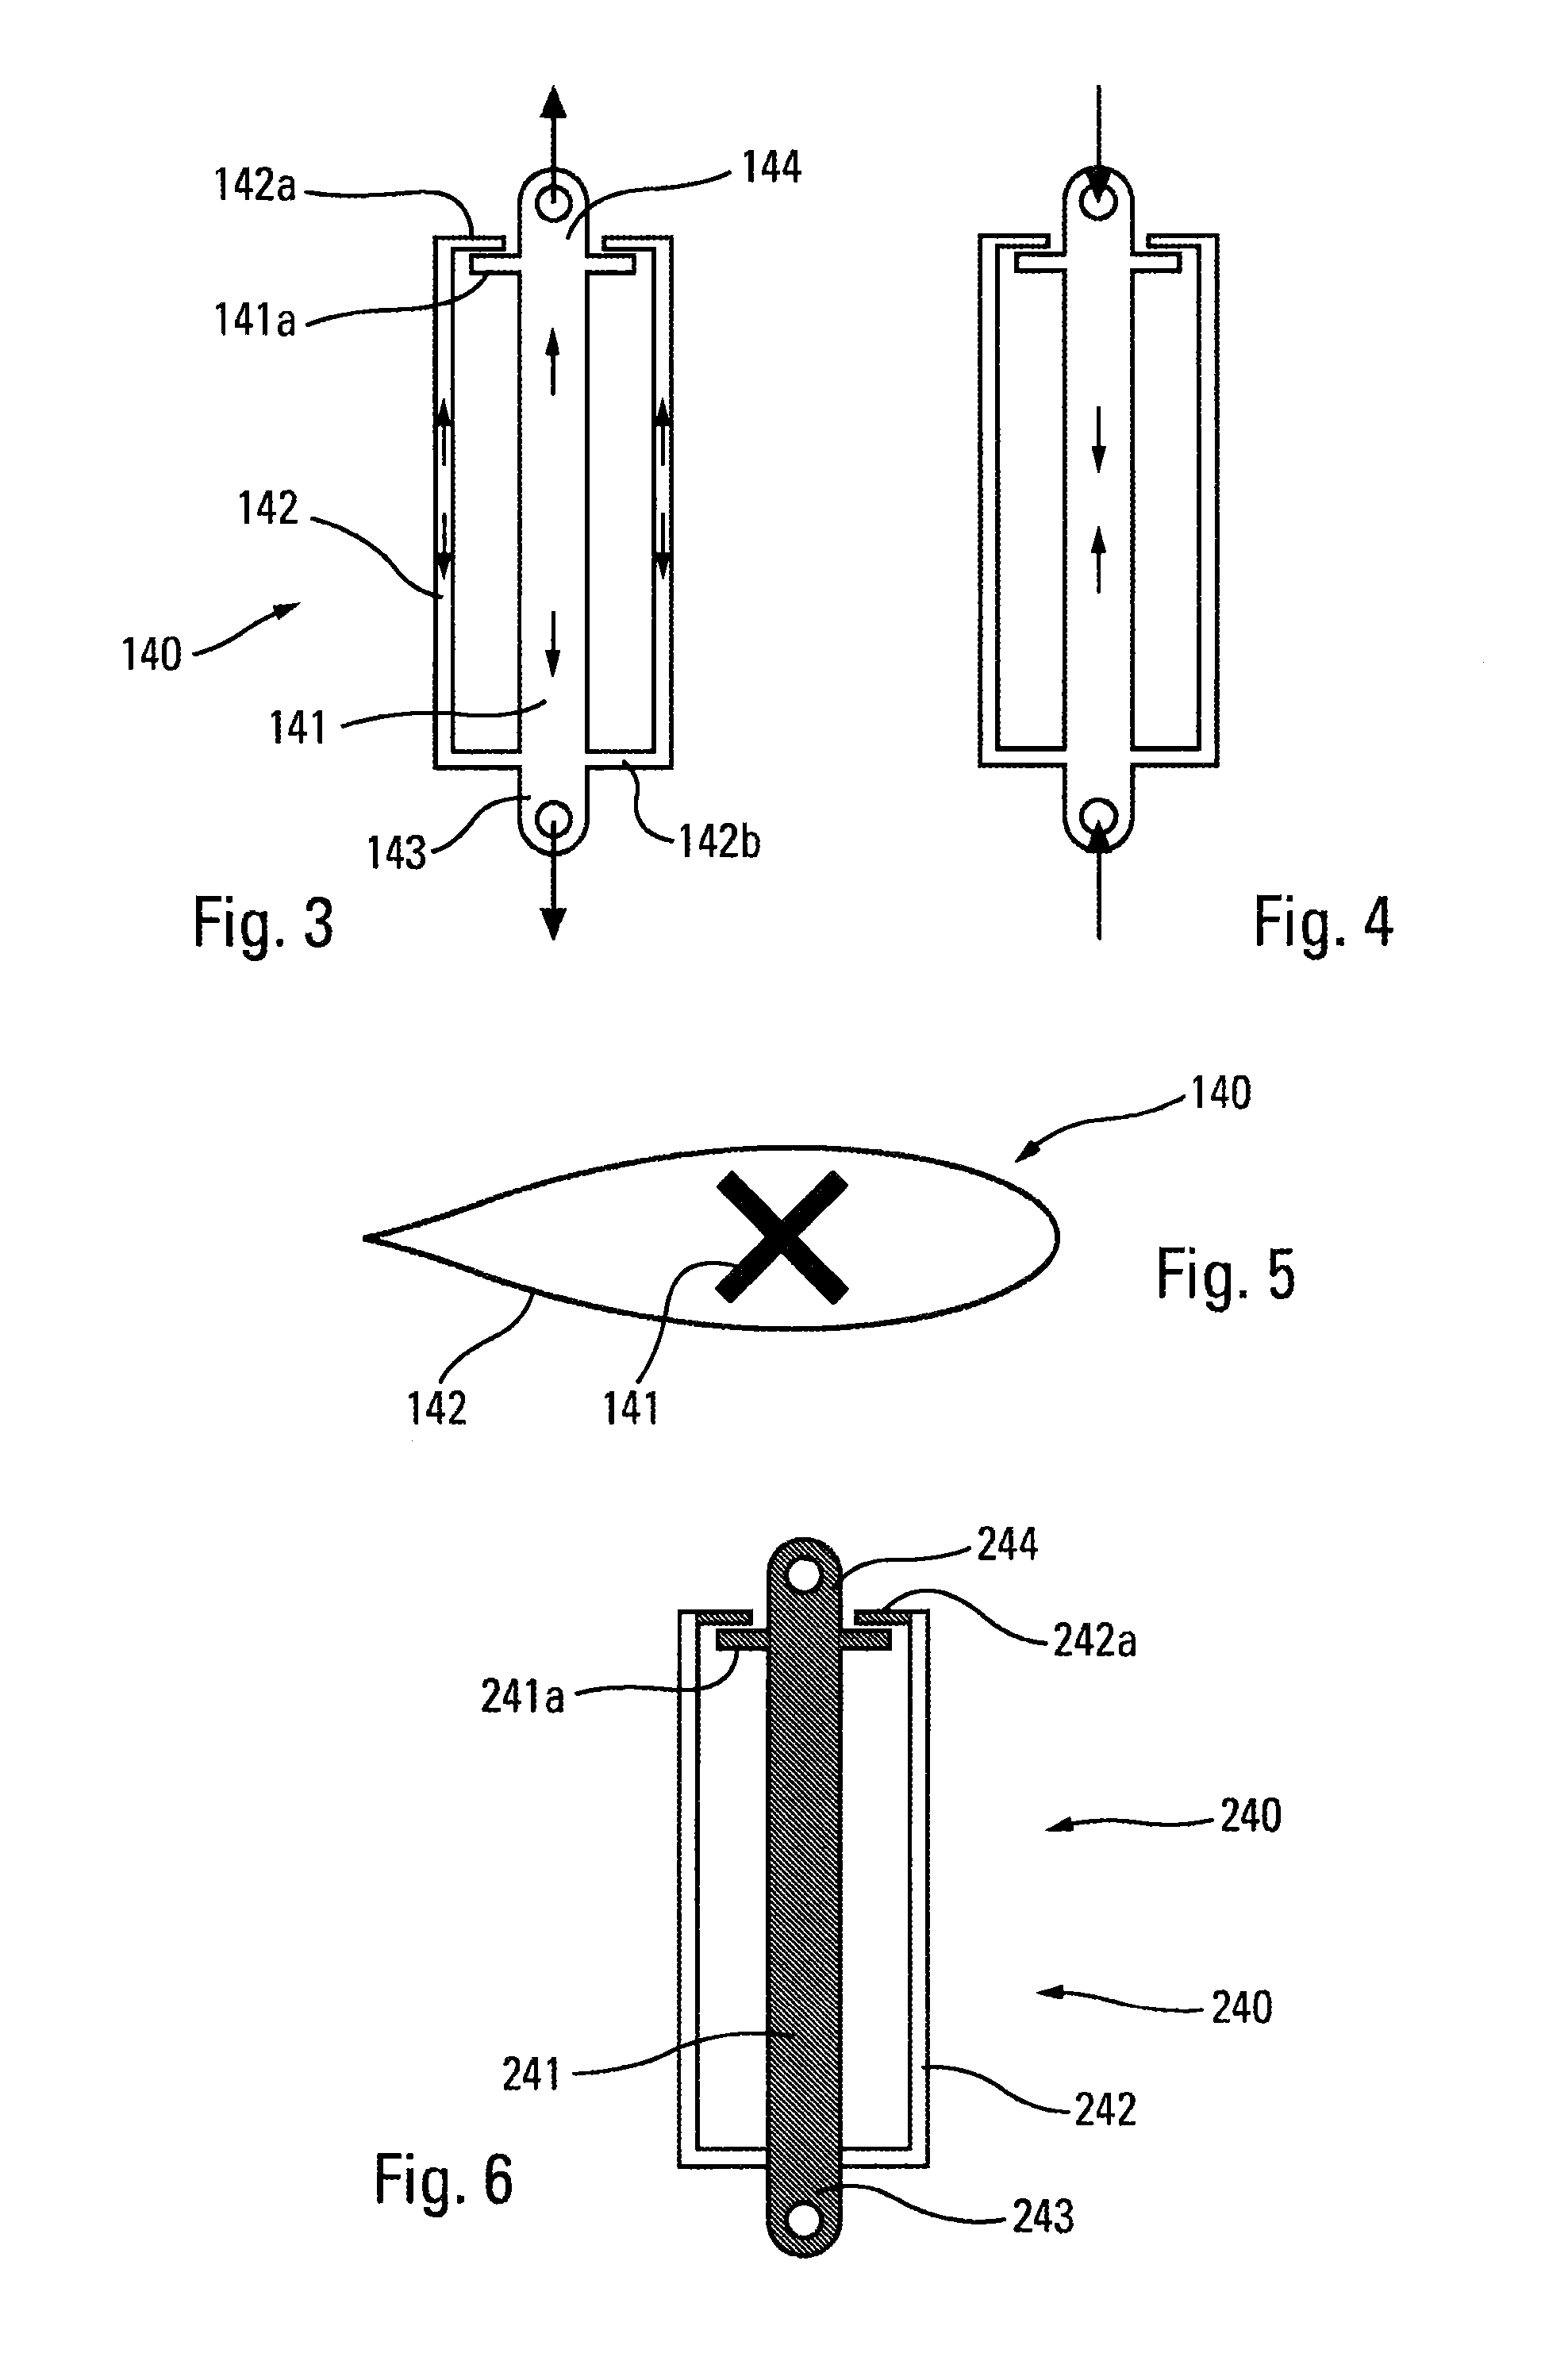 Hyperstatic truss comprising connecting rods